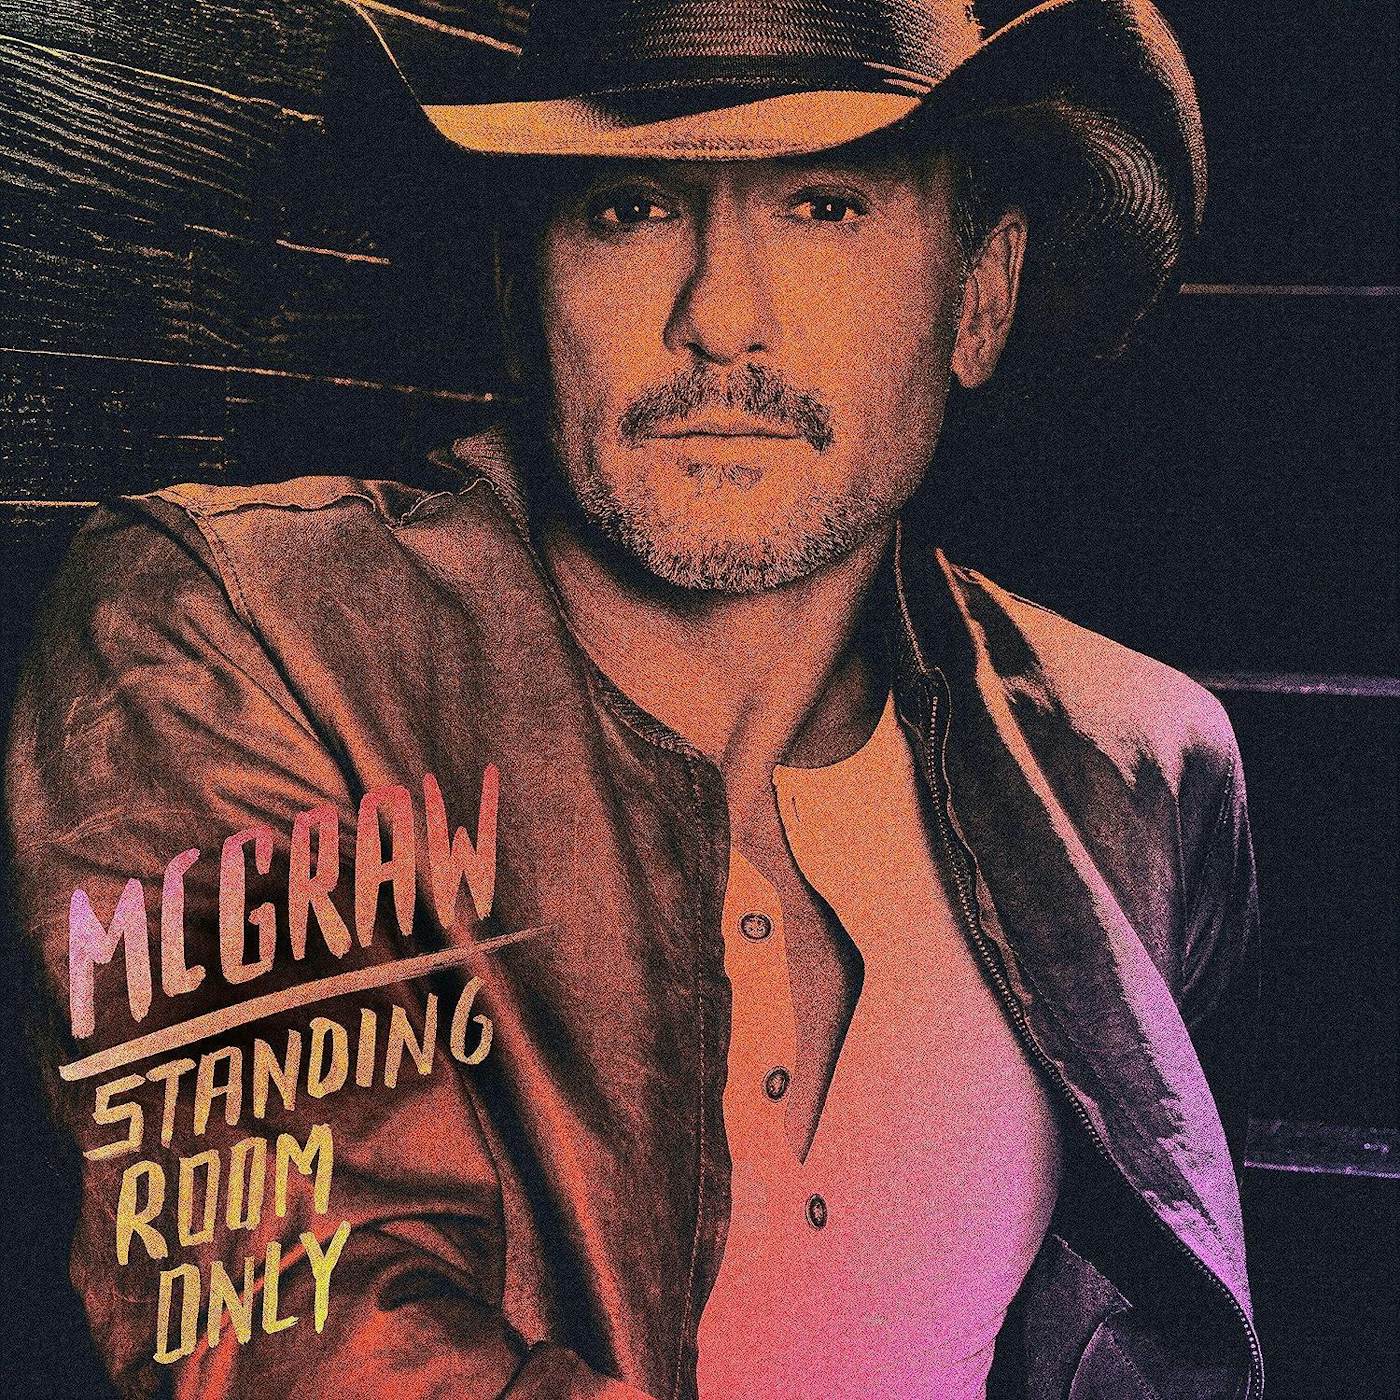 Tim McGraw Standing Room Only (Clear) Vinyl Record